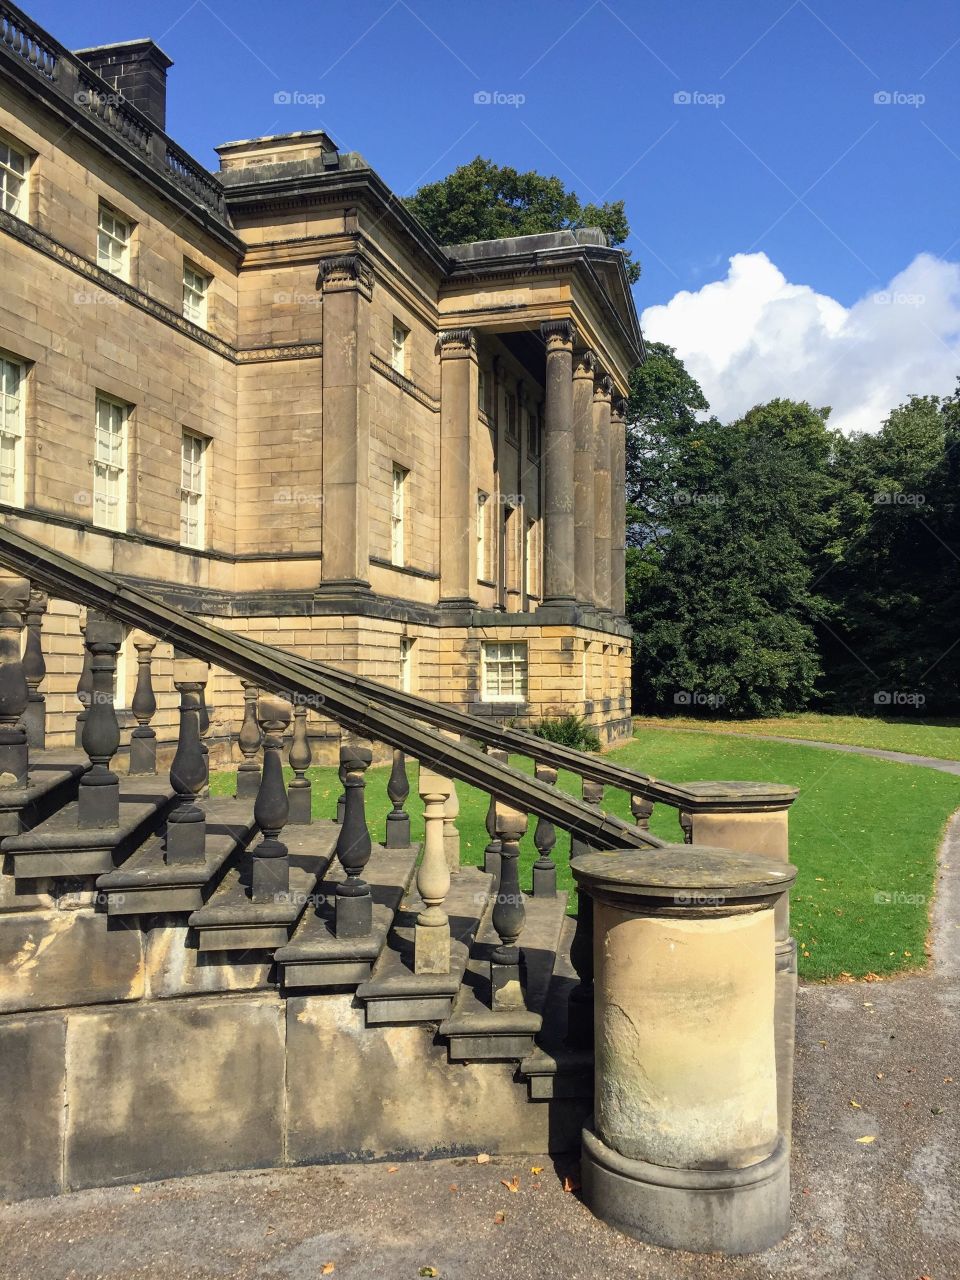 Nostell Yorkshire England 